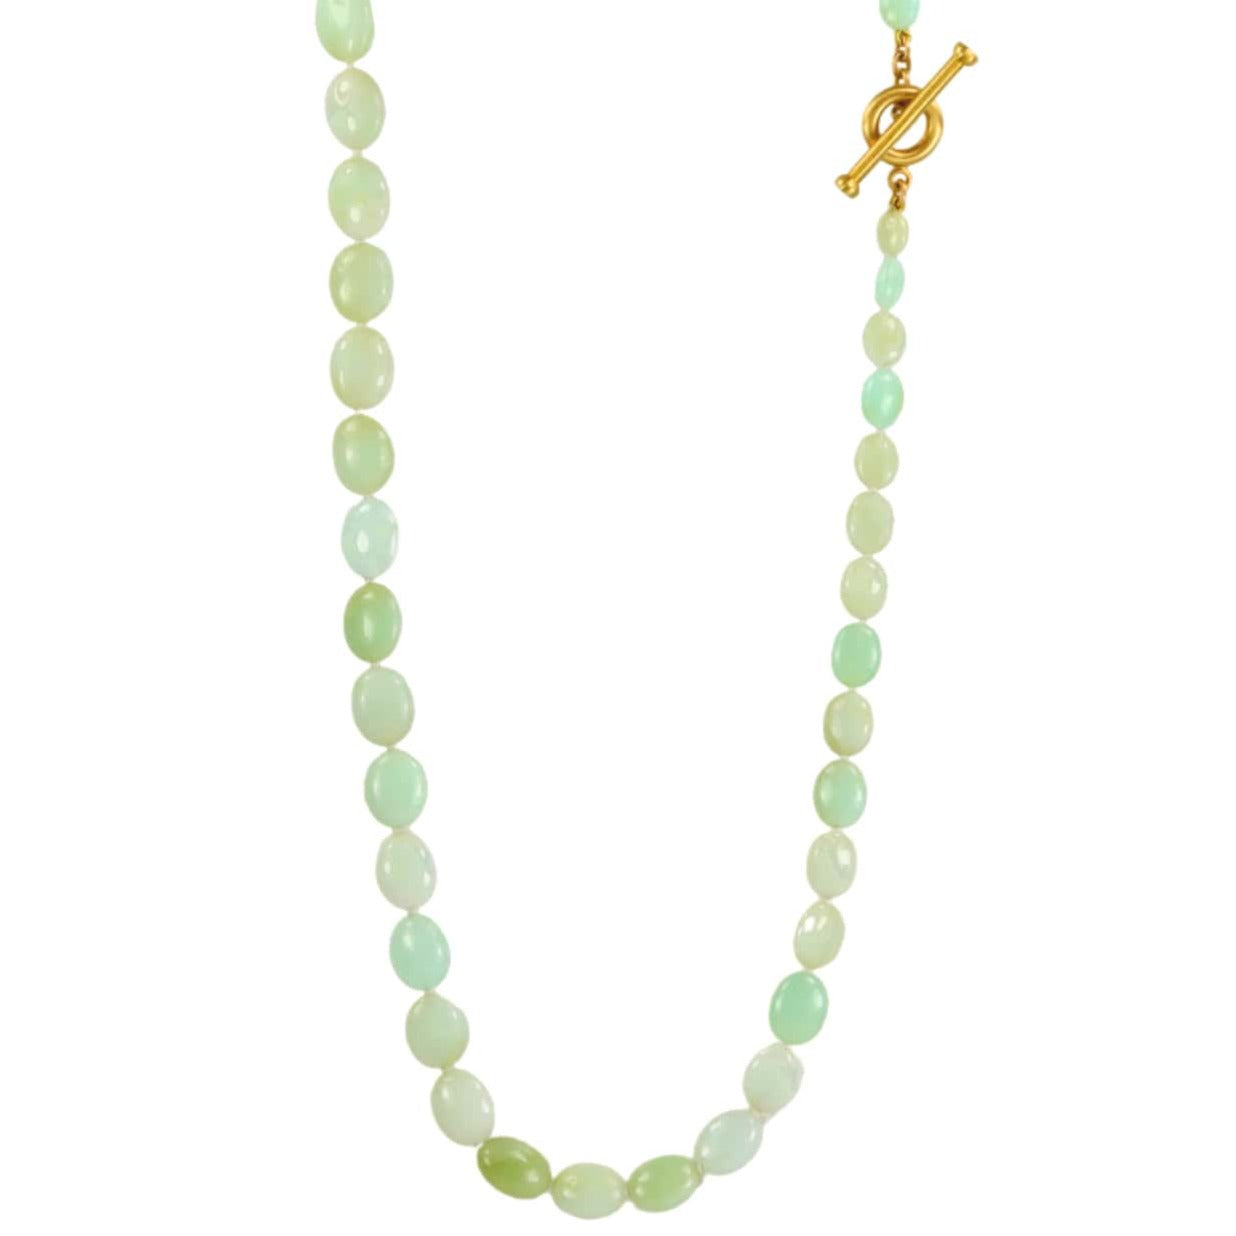 Caroline Ellen Smooth Oval Serbian Green Opal Beaded Necklace with 20K Gold Toggle Clasp